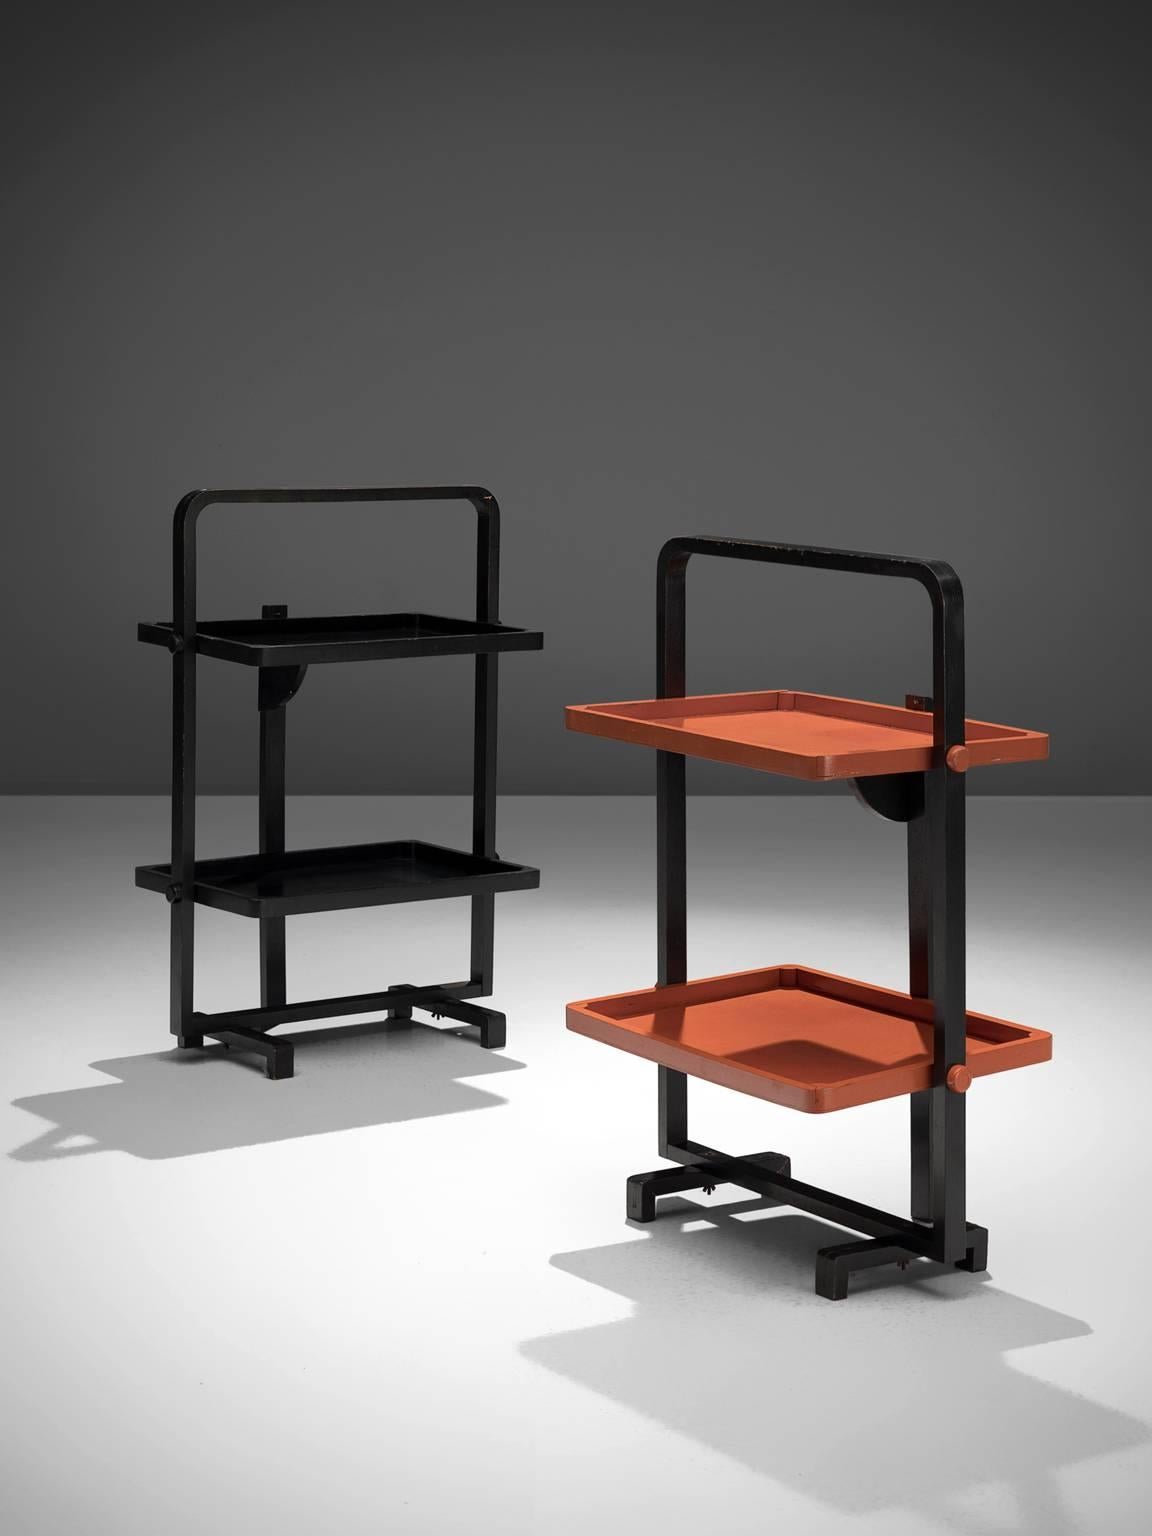 André Groult, pair of tea trays, wood, France, 1930s.

These folding tea trays are designed by André Groult. One piece is all black whereas the other piece is black and orange, both forming a strong singular item even though they are not large.